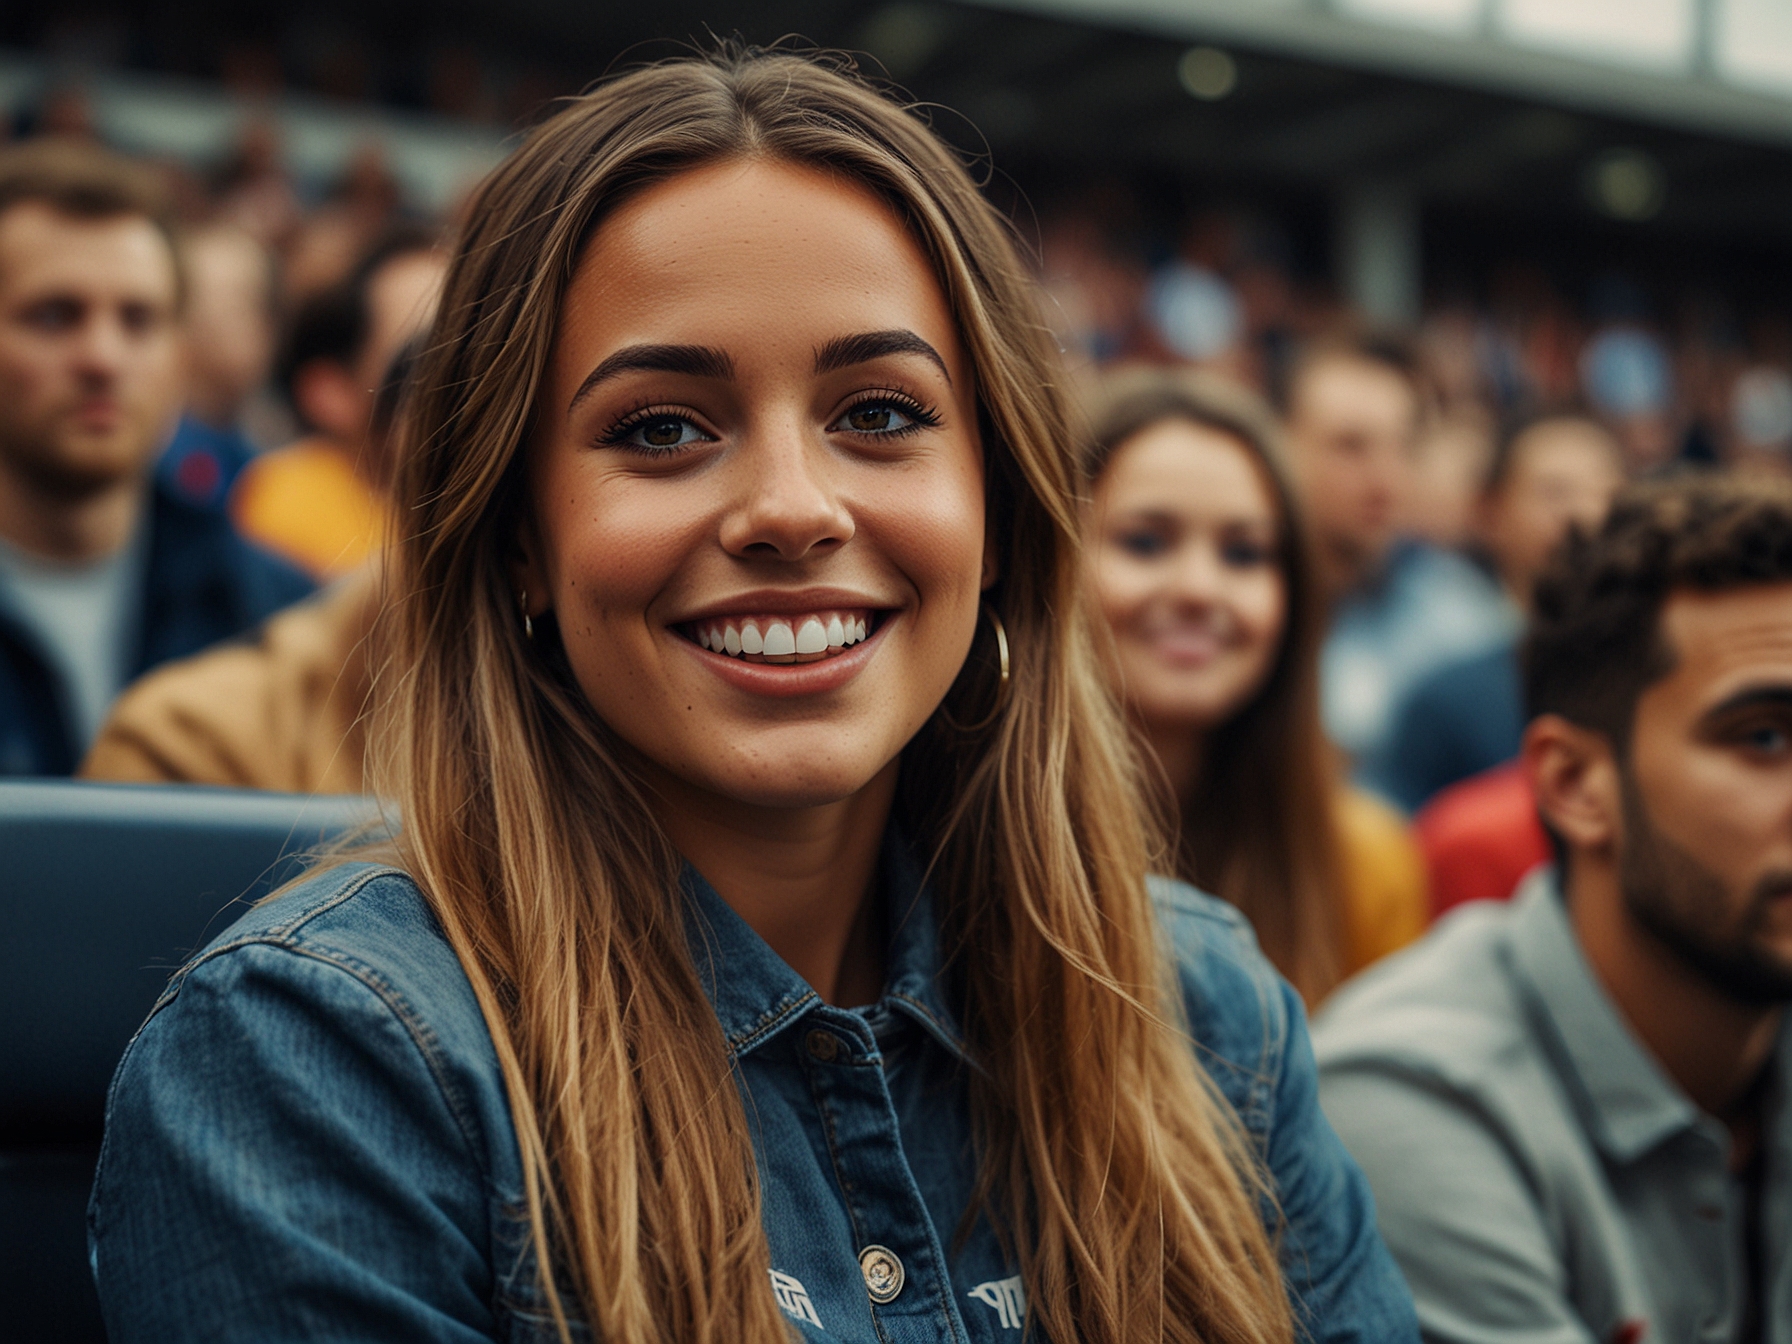 A smiling Lauryn Goodman attends a football match during the Euros, capturing her in the stands while her supportive Instagram messages hint at her complex relationship with Kyle Walker.